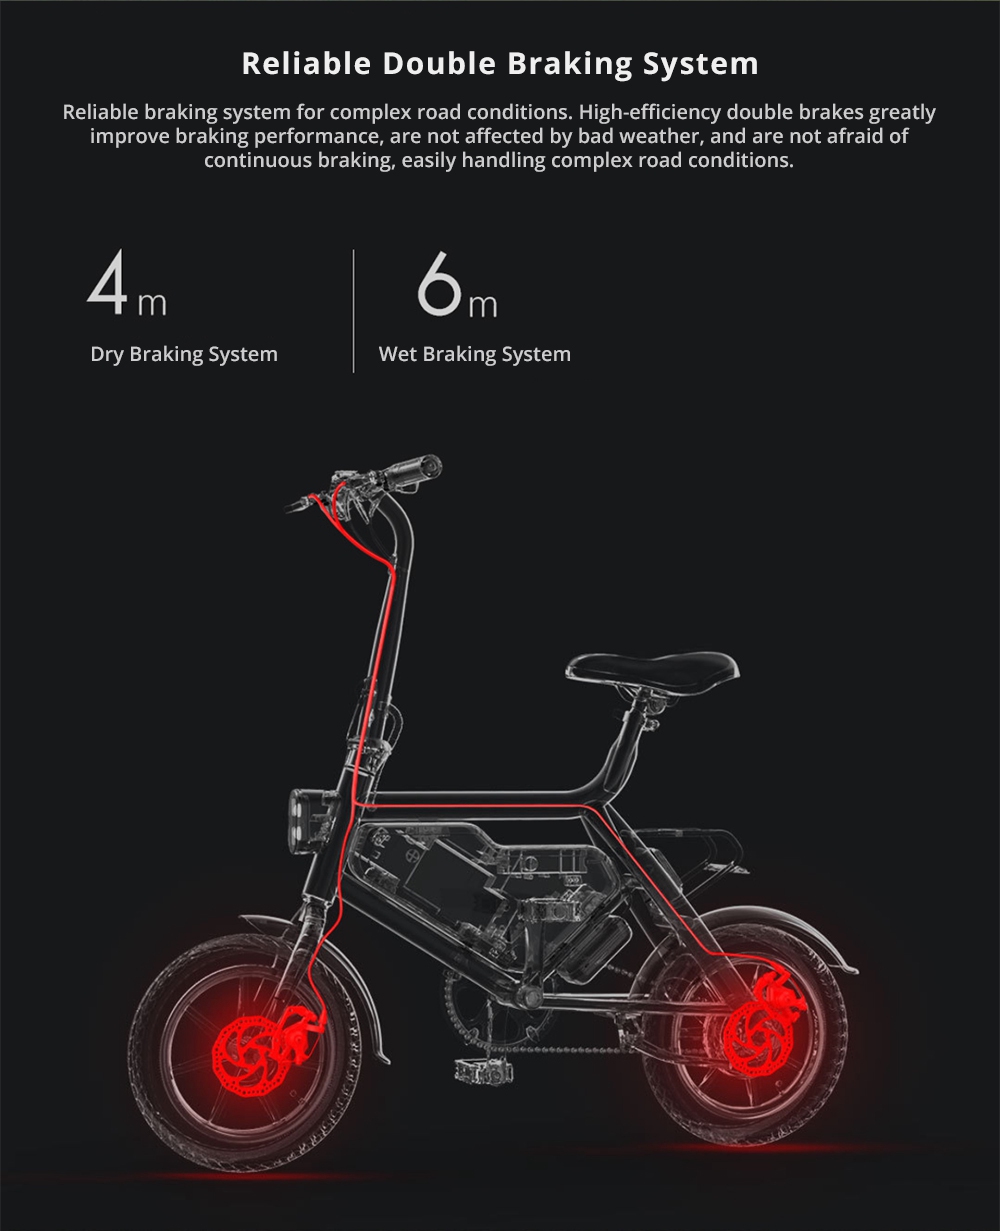 Xiaomi HIMO V1 Plus Portable Folding Electric Moped Bicycle 250W Motor 14 Inch Wheel Diameter Lightweight Design - Gray